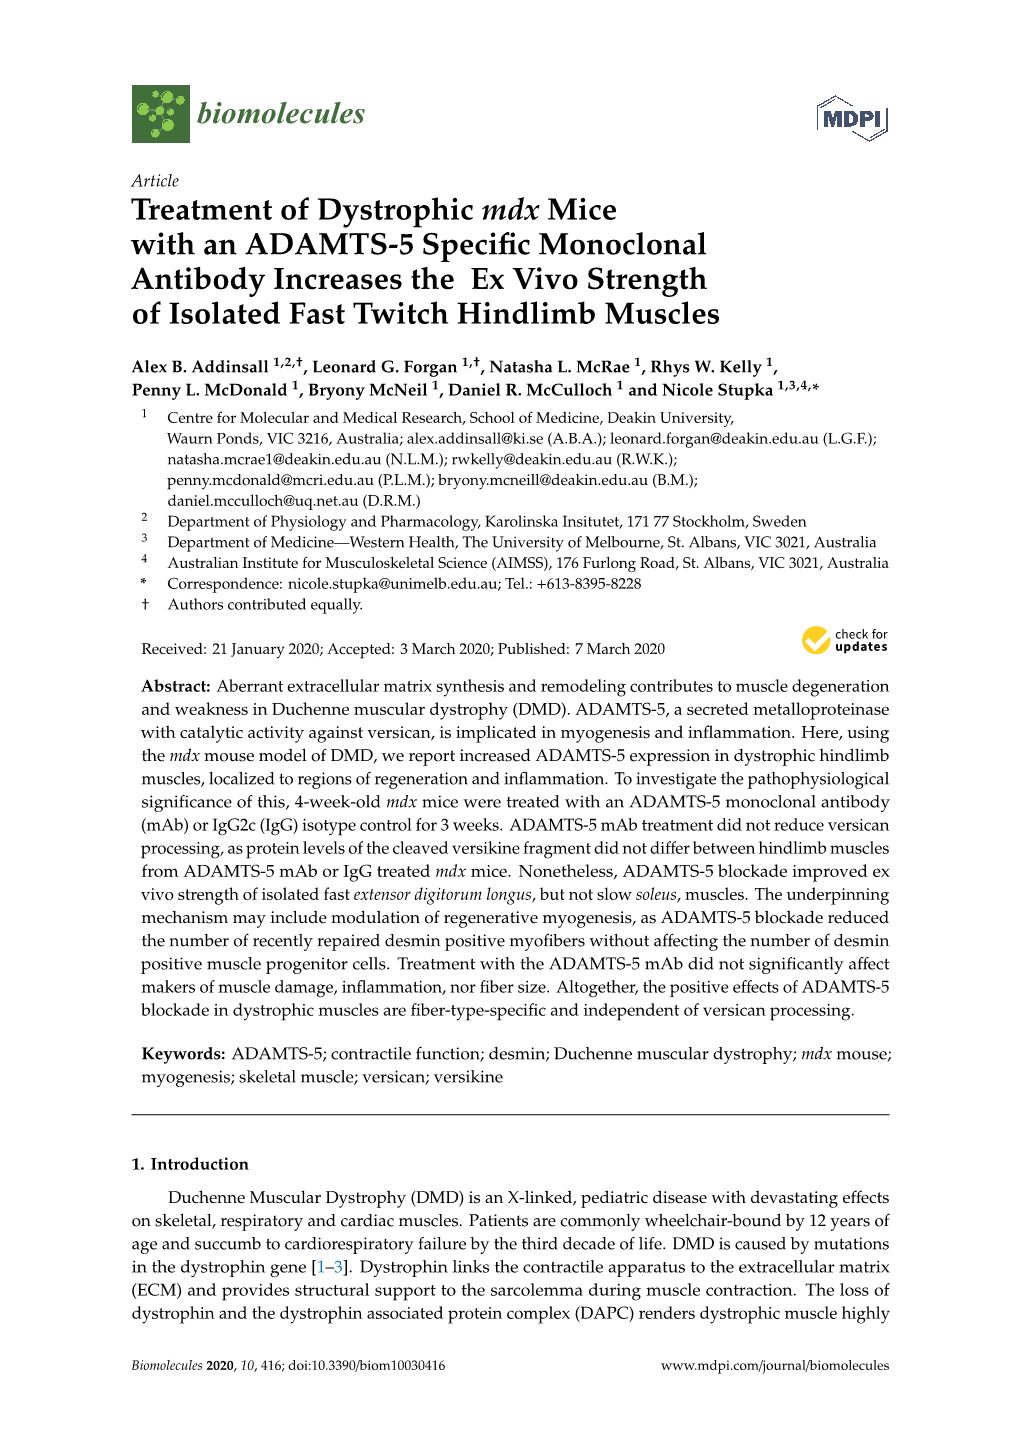 Treatment of Dystrophic Mdx Mice with an ADAMTS-5 Specific